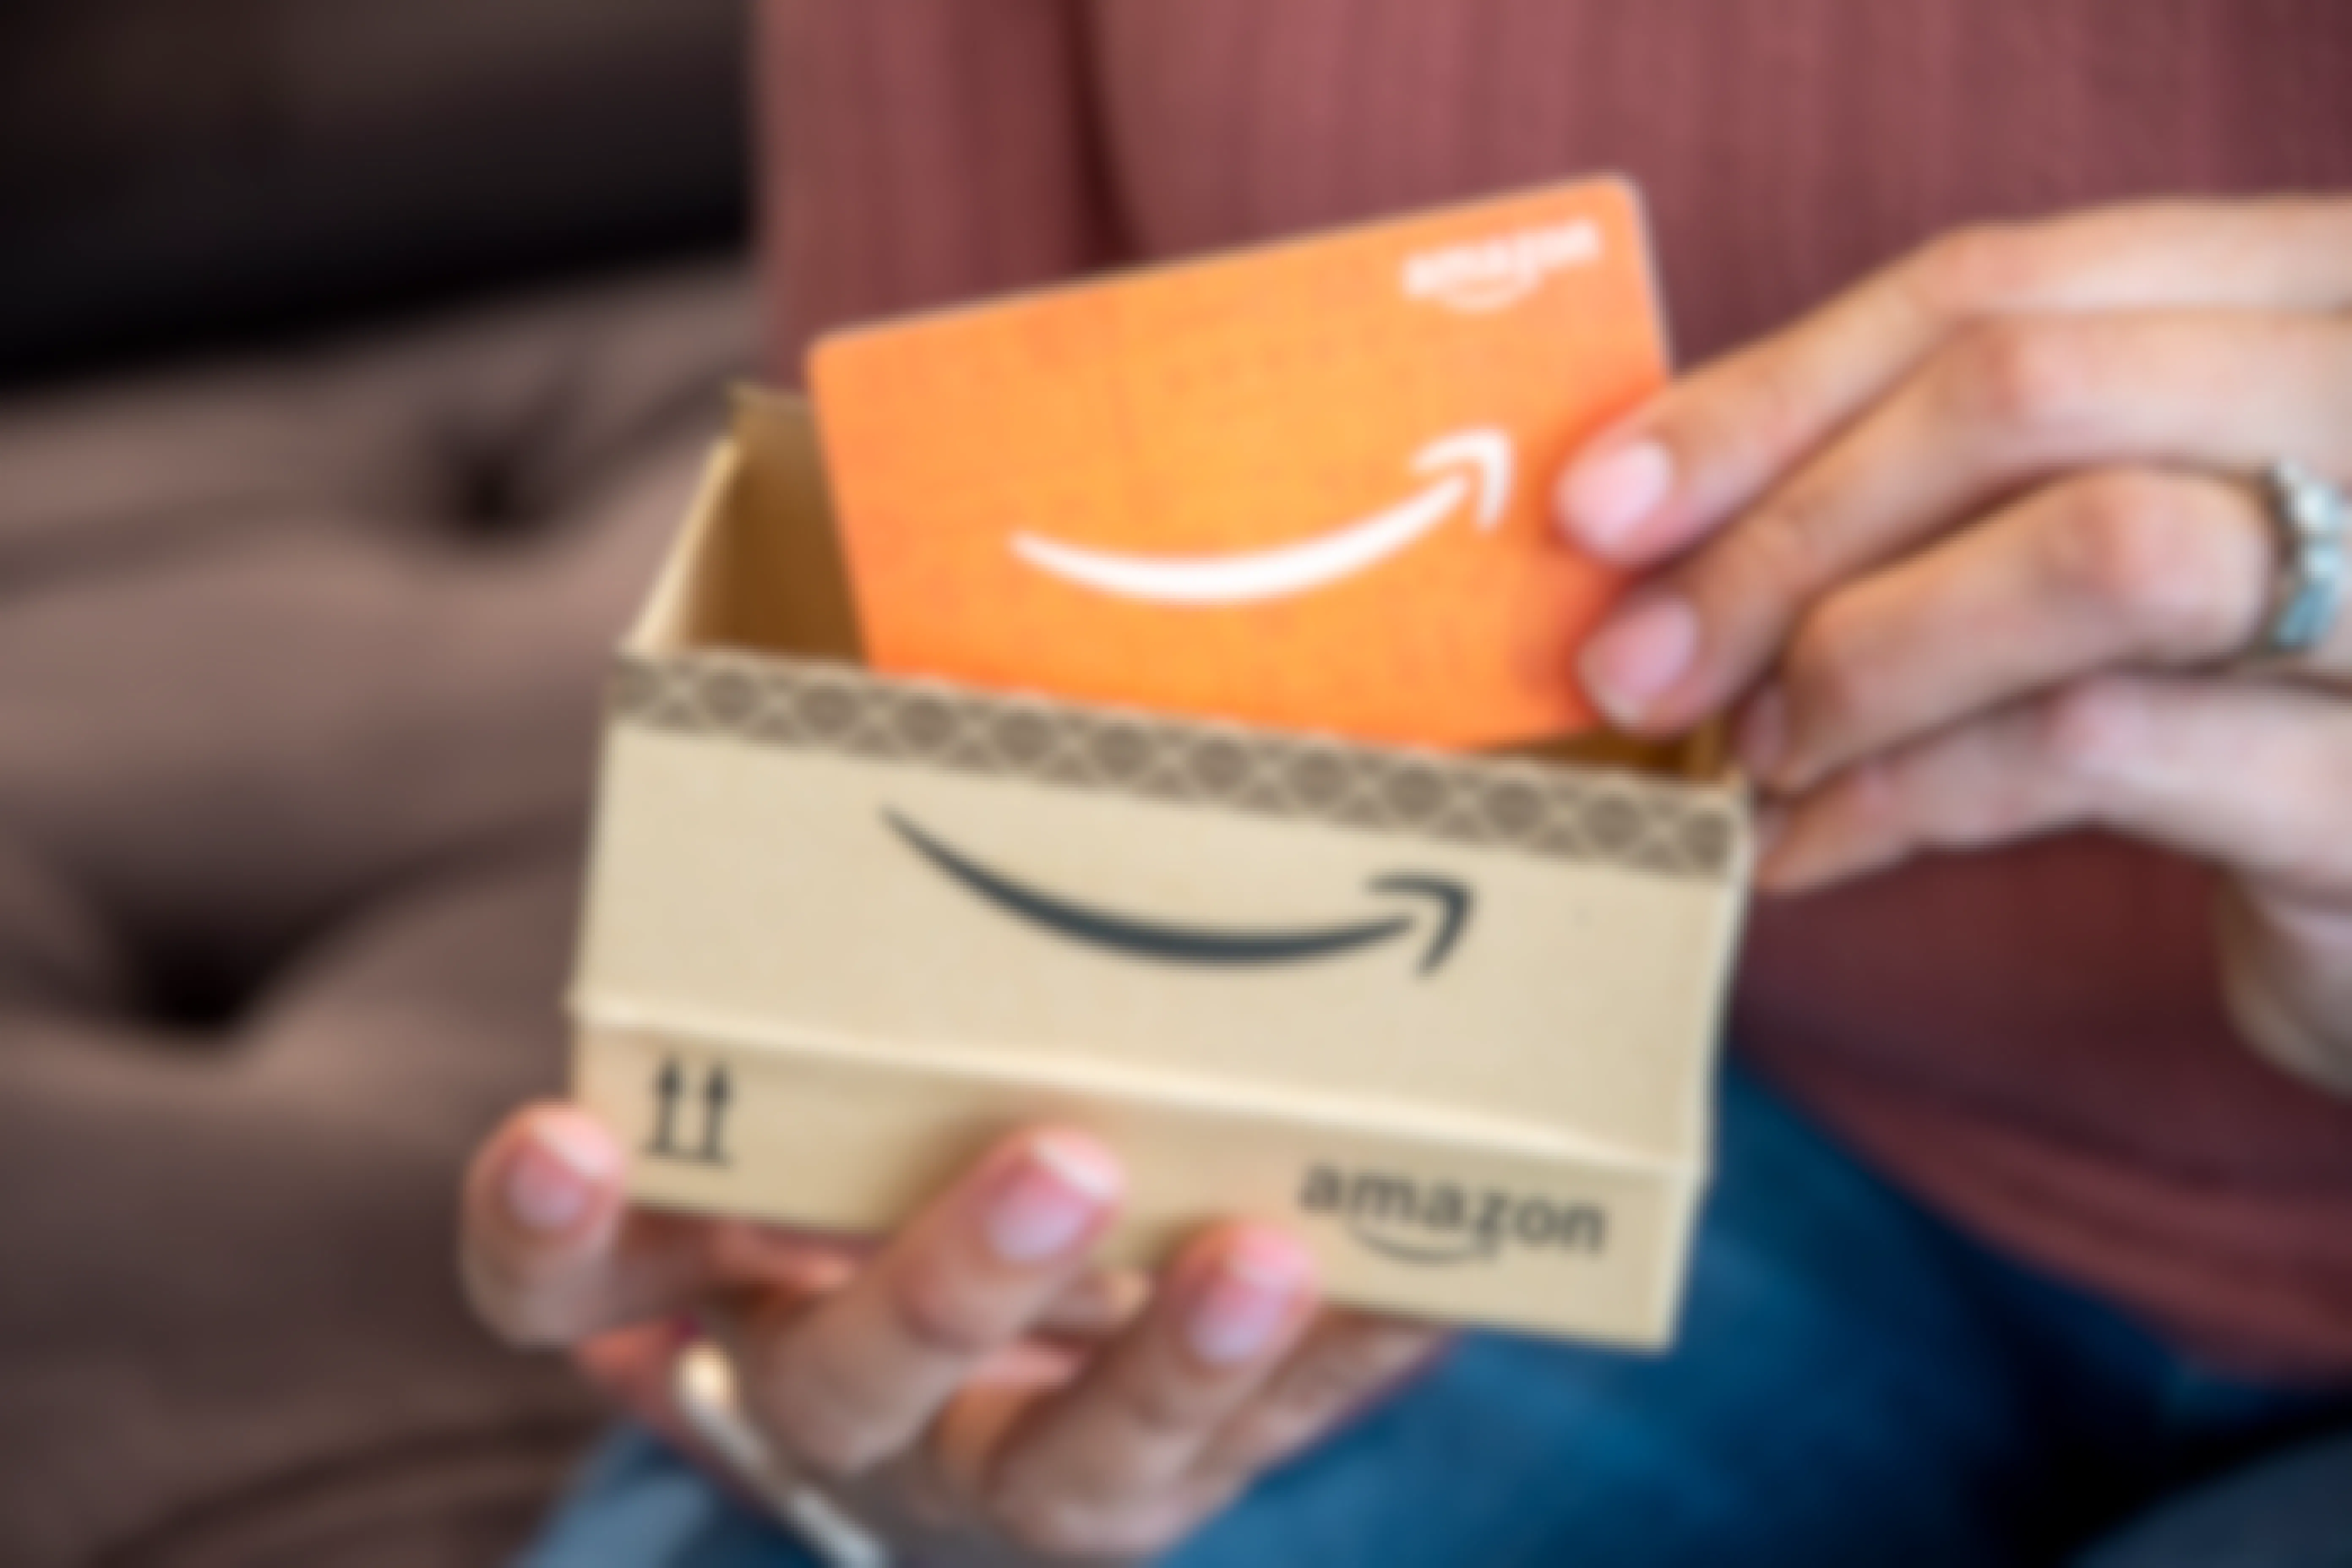 Amazon Stocking Stuffers & Gifts That Are Trending Now